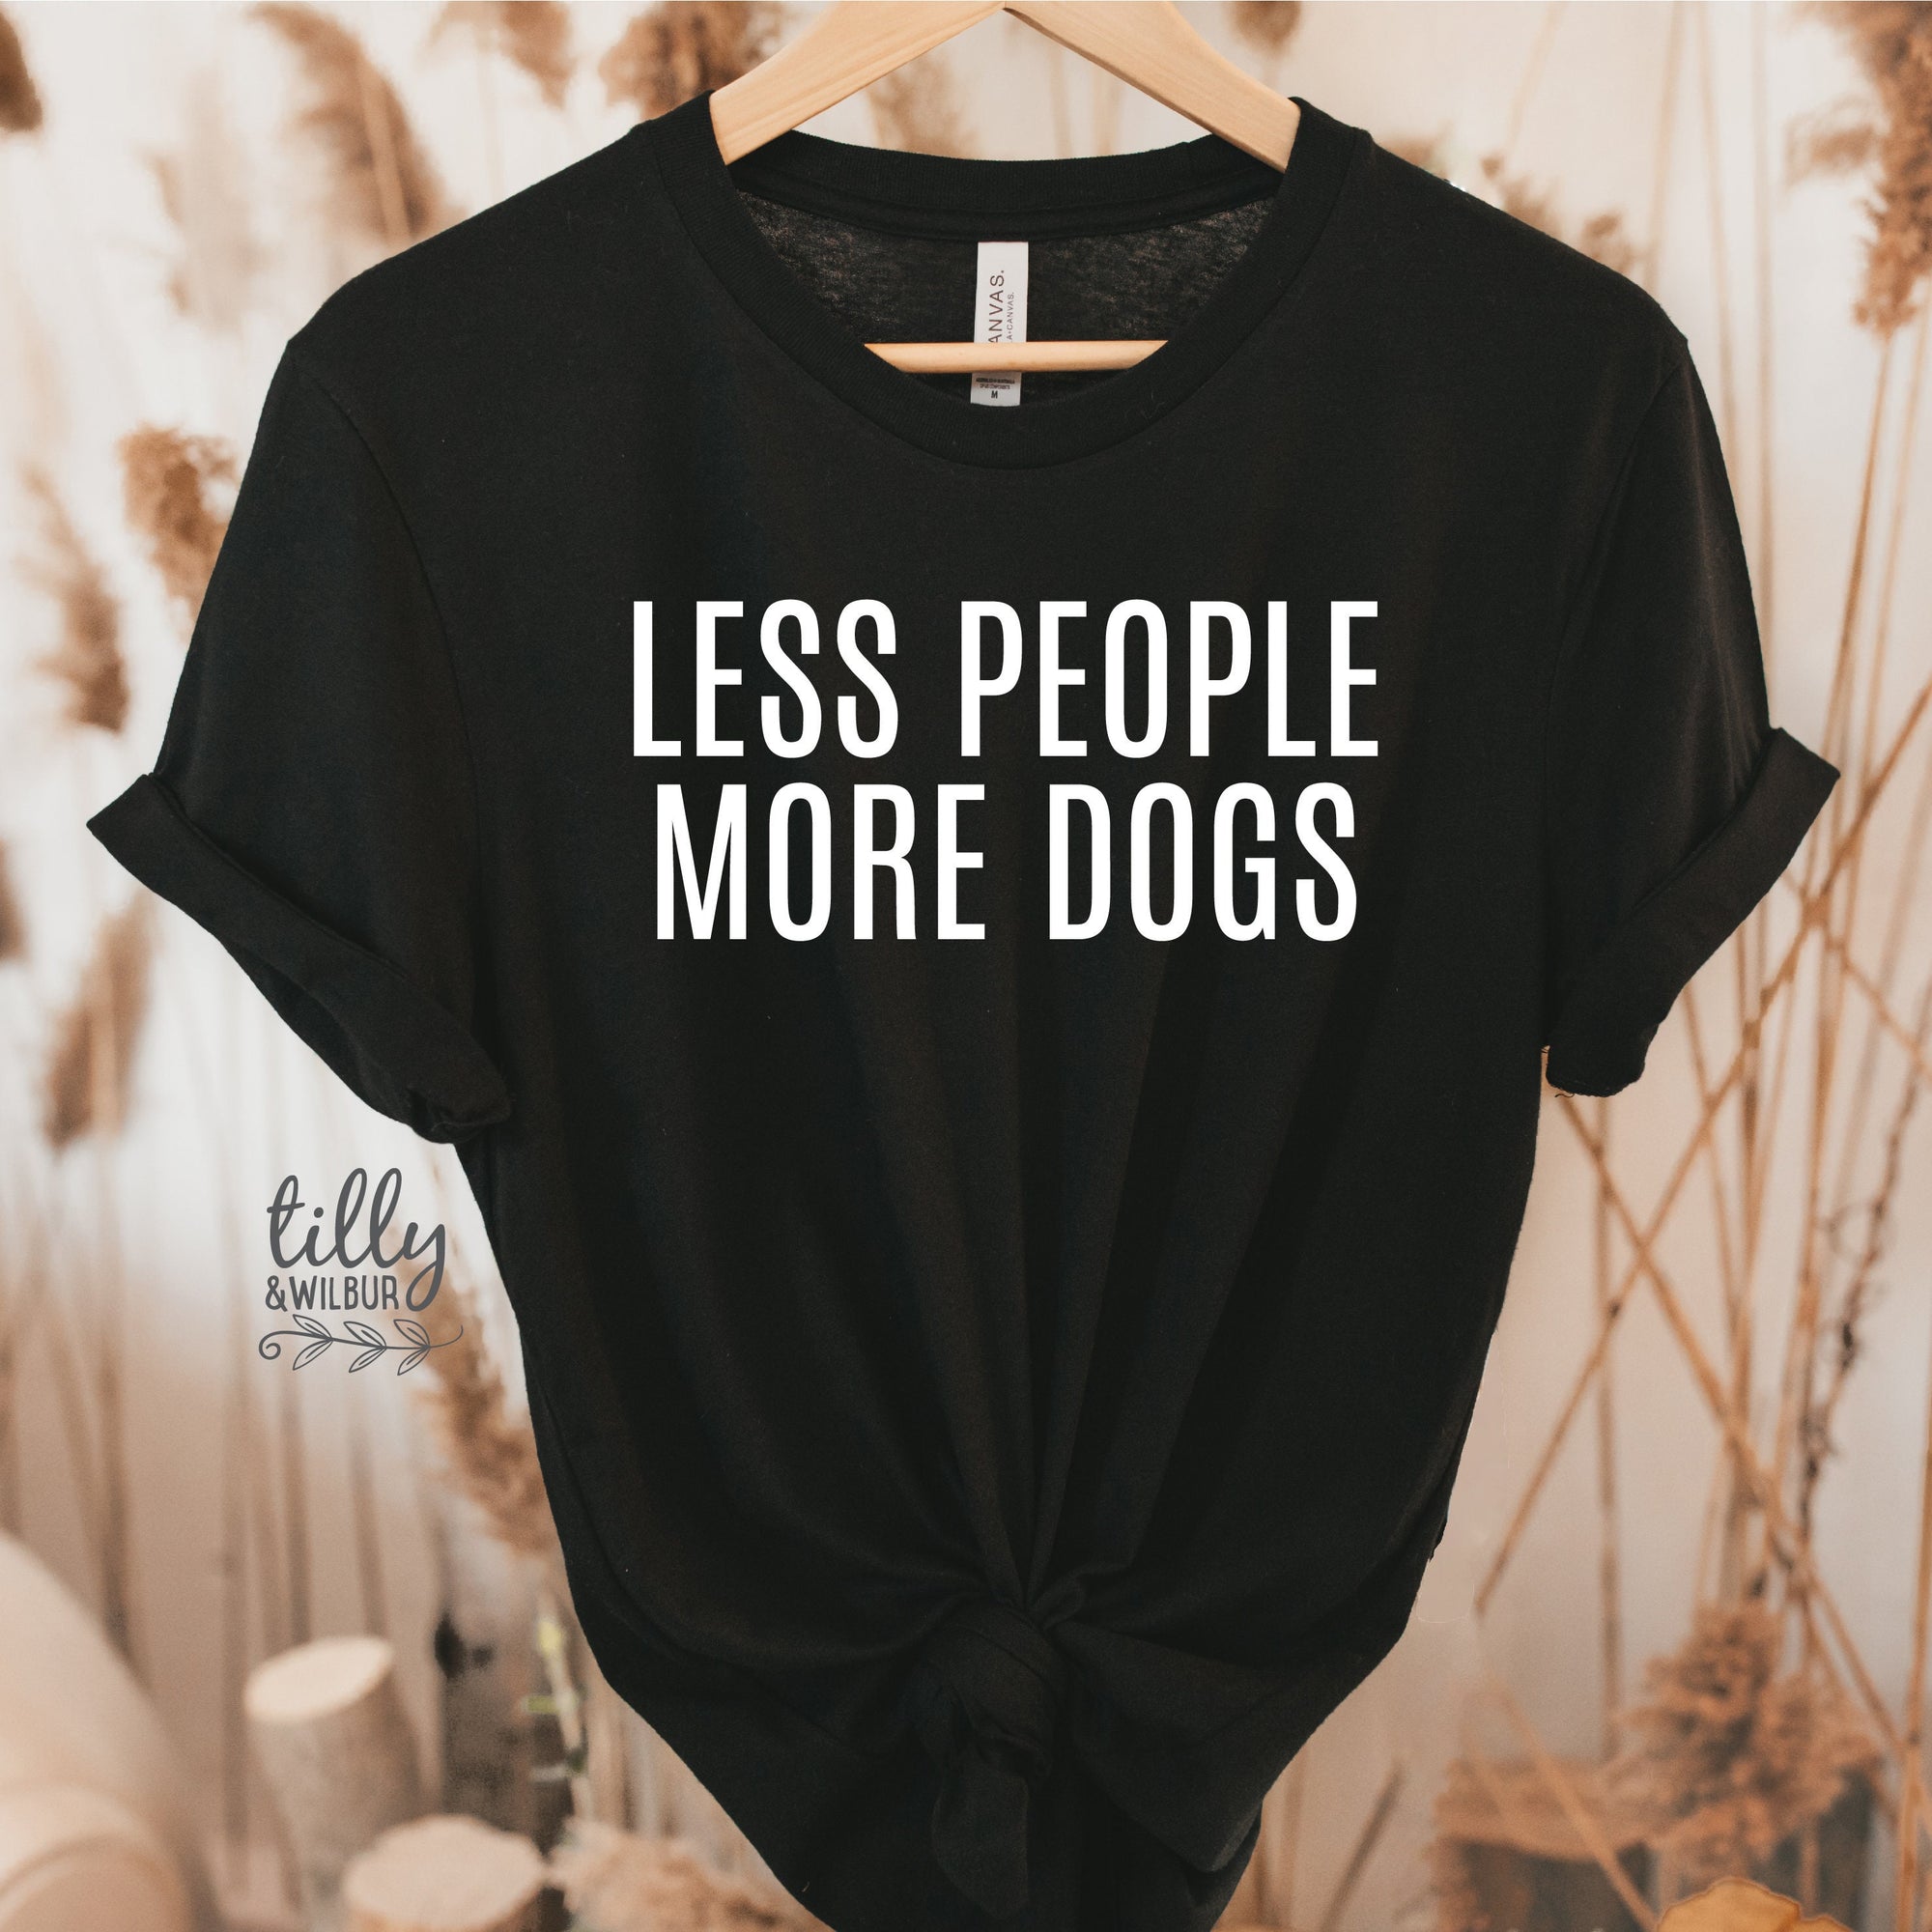 Dog T-Shirt, Dog Mama T-Shirt, Less People More Dogs T-Shirt, Funny T-Shirt, I Love Dogs TShirt, Funny Women's T-Shirt, Gift For Her